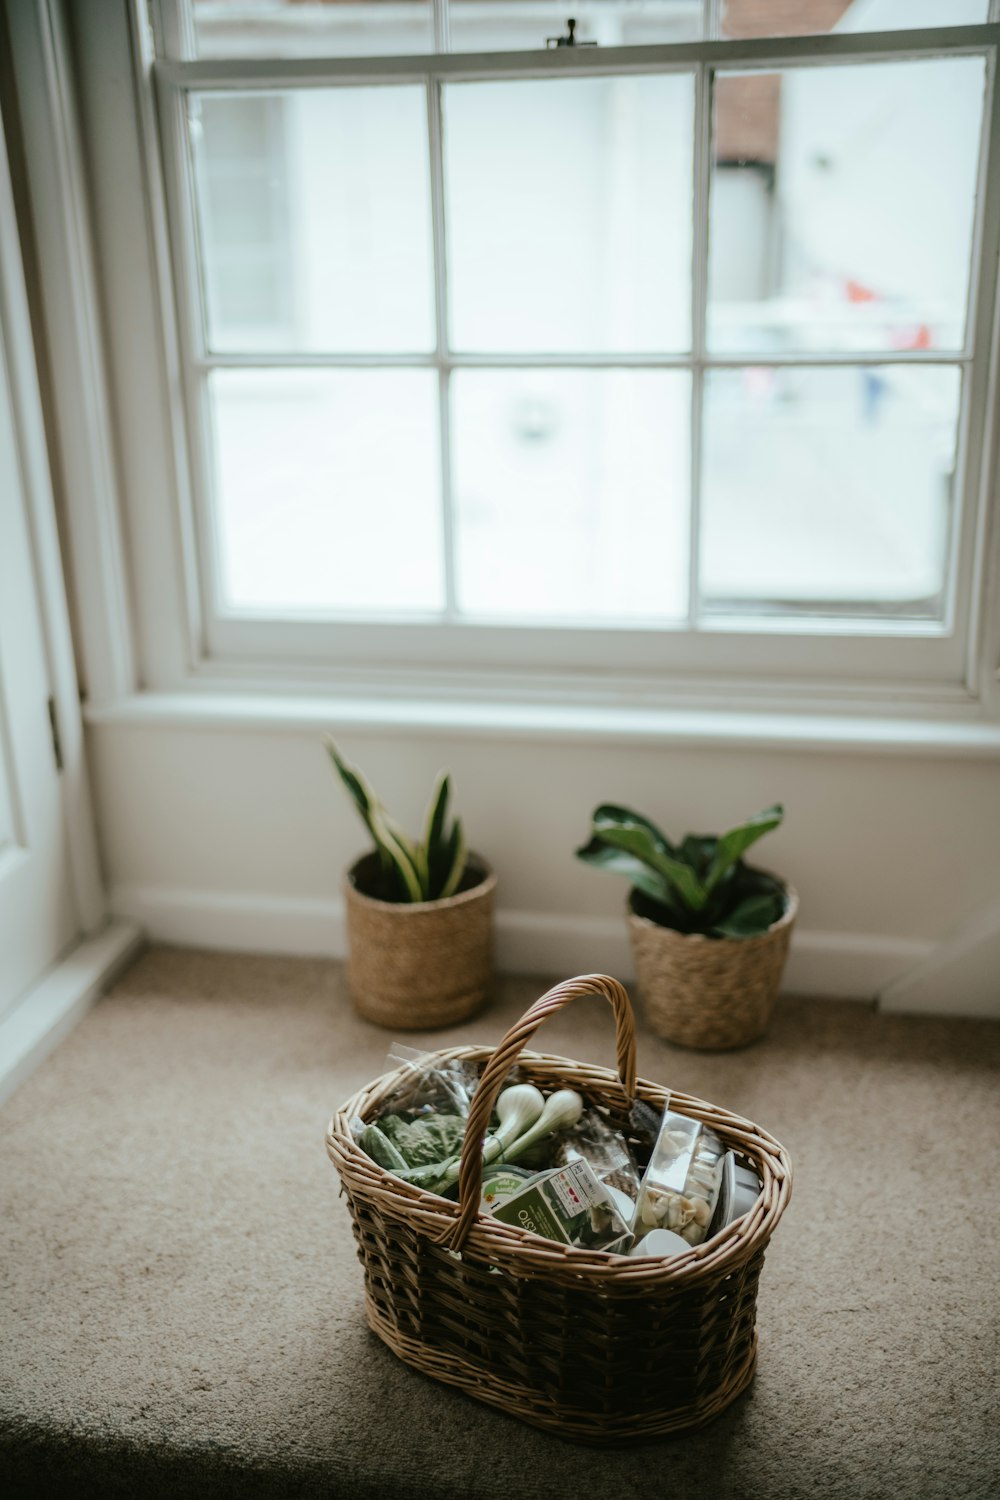 a wicker basket filled with rocks and plants next to a window